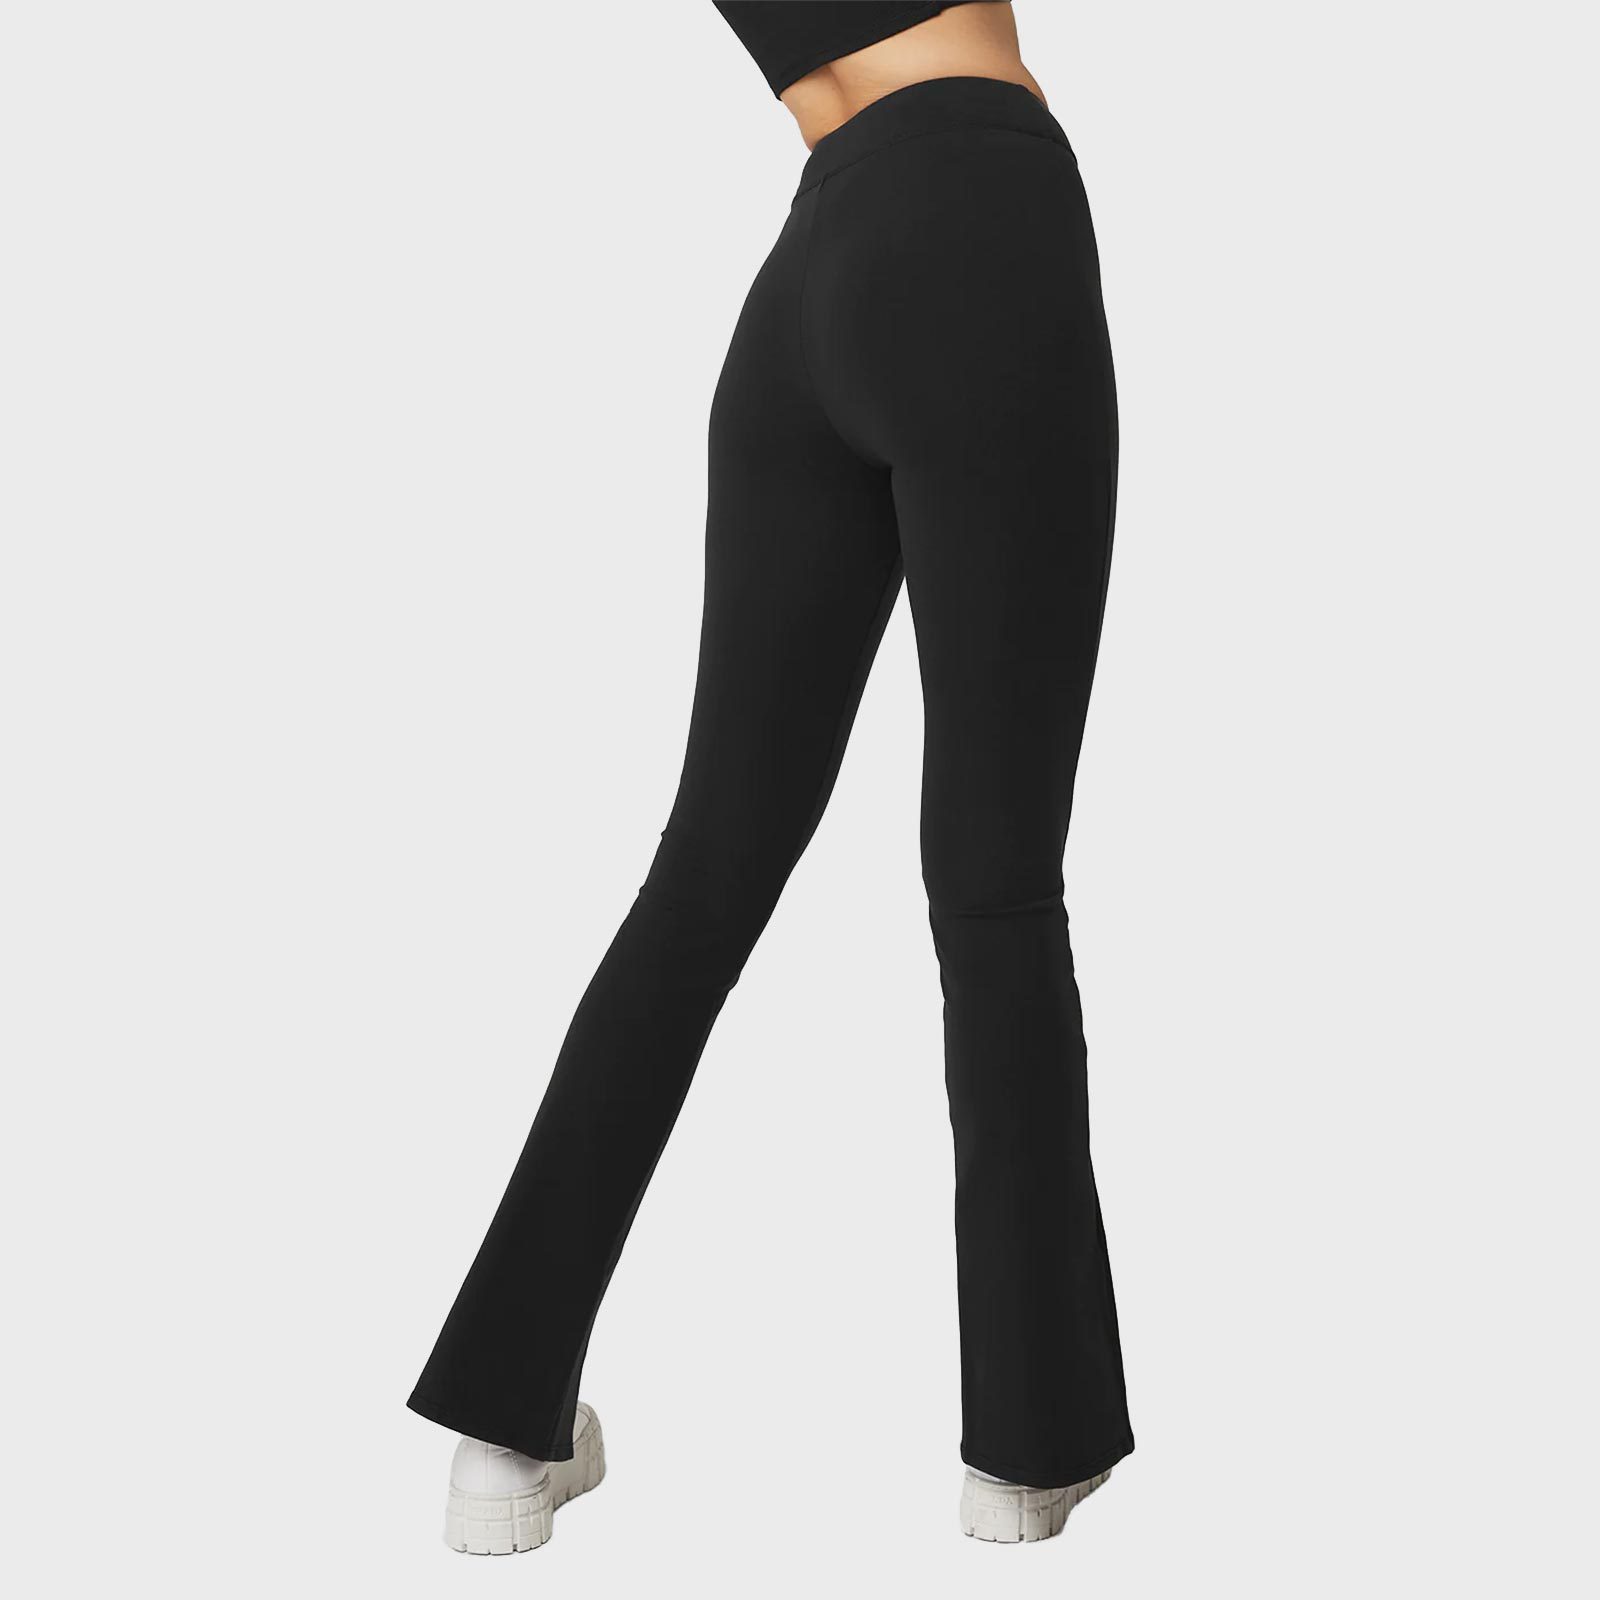 Bell Bottom Leggings with Scrunch Butt and Pockets • Value Yoga